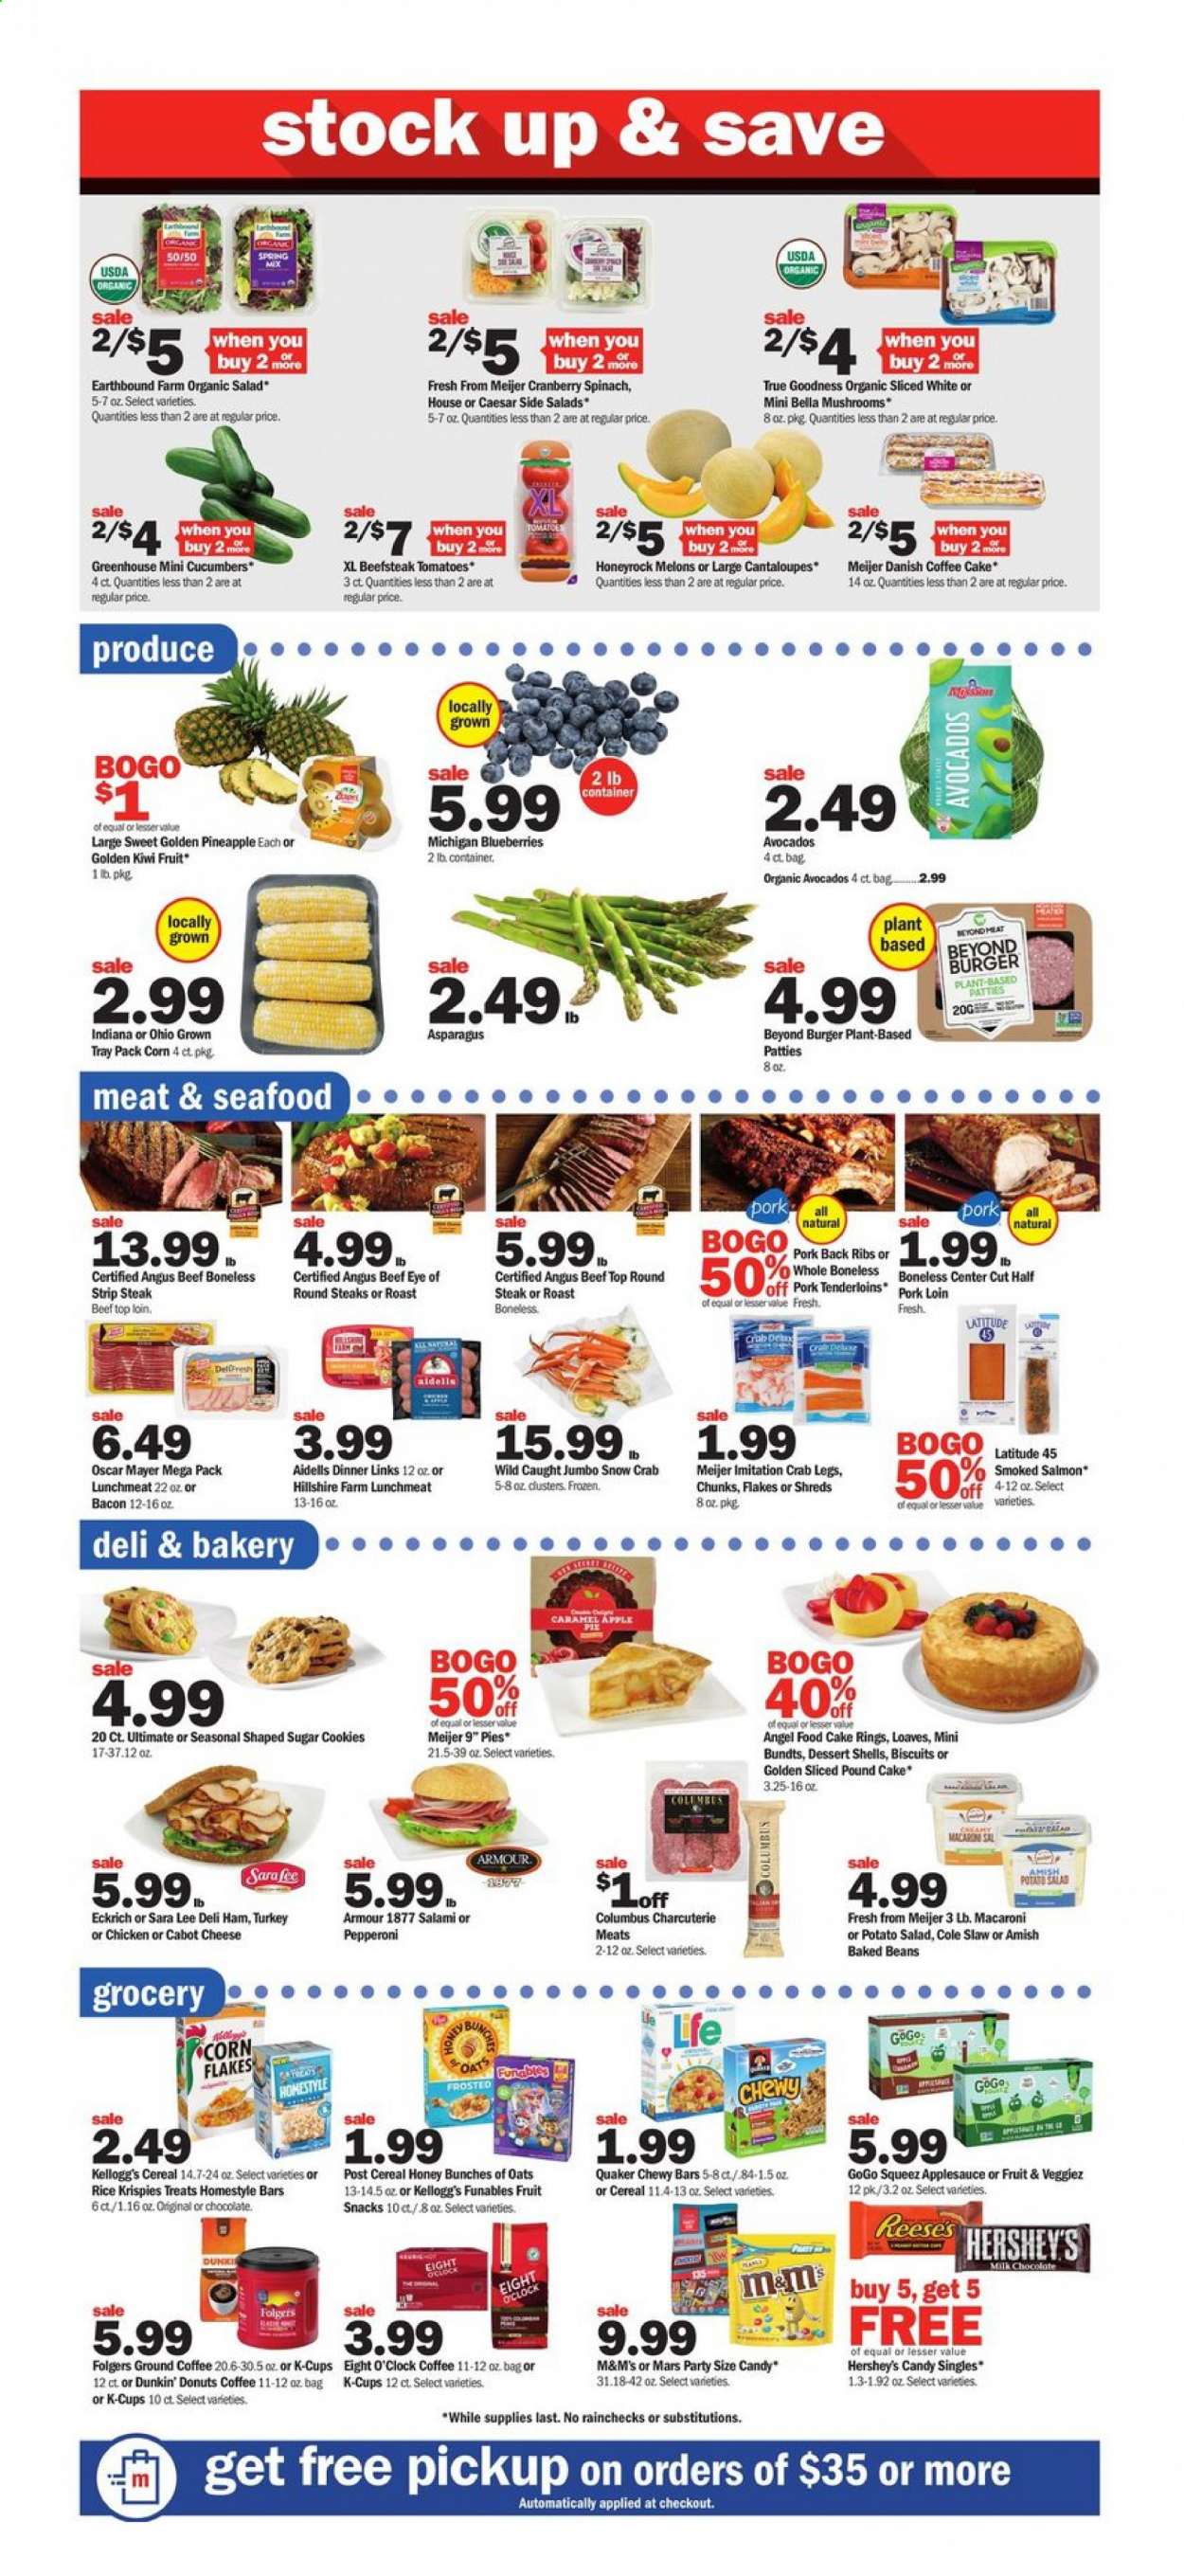 thumbnail - Meijer Flyer - 07/25/2021 - 07/31/2021 - Sales products - cake, Sara Lee, apple pie, Angel Food, coffee cake, Dunkin' Donuts, pound cake, dessert shells, asparagus, cantaloupe, cucumber, tomatoes, avocado, blueberries, kiwi, pineapple, salmon, smoked salmon, seafood, crab legs, crab, macaroni, hamburger, Quaker, bacon, salami, ham, Hillshire Farm, Oscar Mayer, pepperoni, potato salad, lunch meat, cheese, milk, Reese's, Hershey's, cookies, chocolate, Mars, M&M's, Kellogg's, biscuit, fruit snack, baked beans, corn flakes, Rice Krispies, apple sauce, Folgers, ground coffee, coffee capsules, K-Cups, Eight O'Clock, beef meat, steak, eye of round, round steak, striploin steak, pork loin, pork meat, pork ribs, pork back ribs, tray, bag, melons. Page 2.